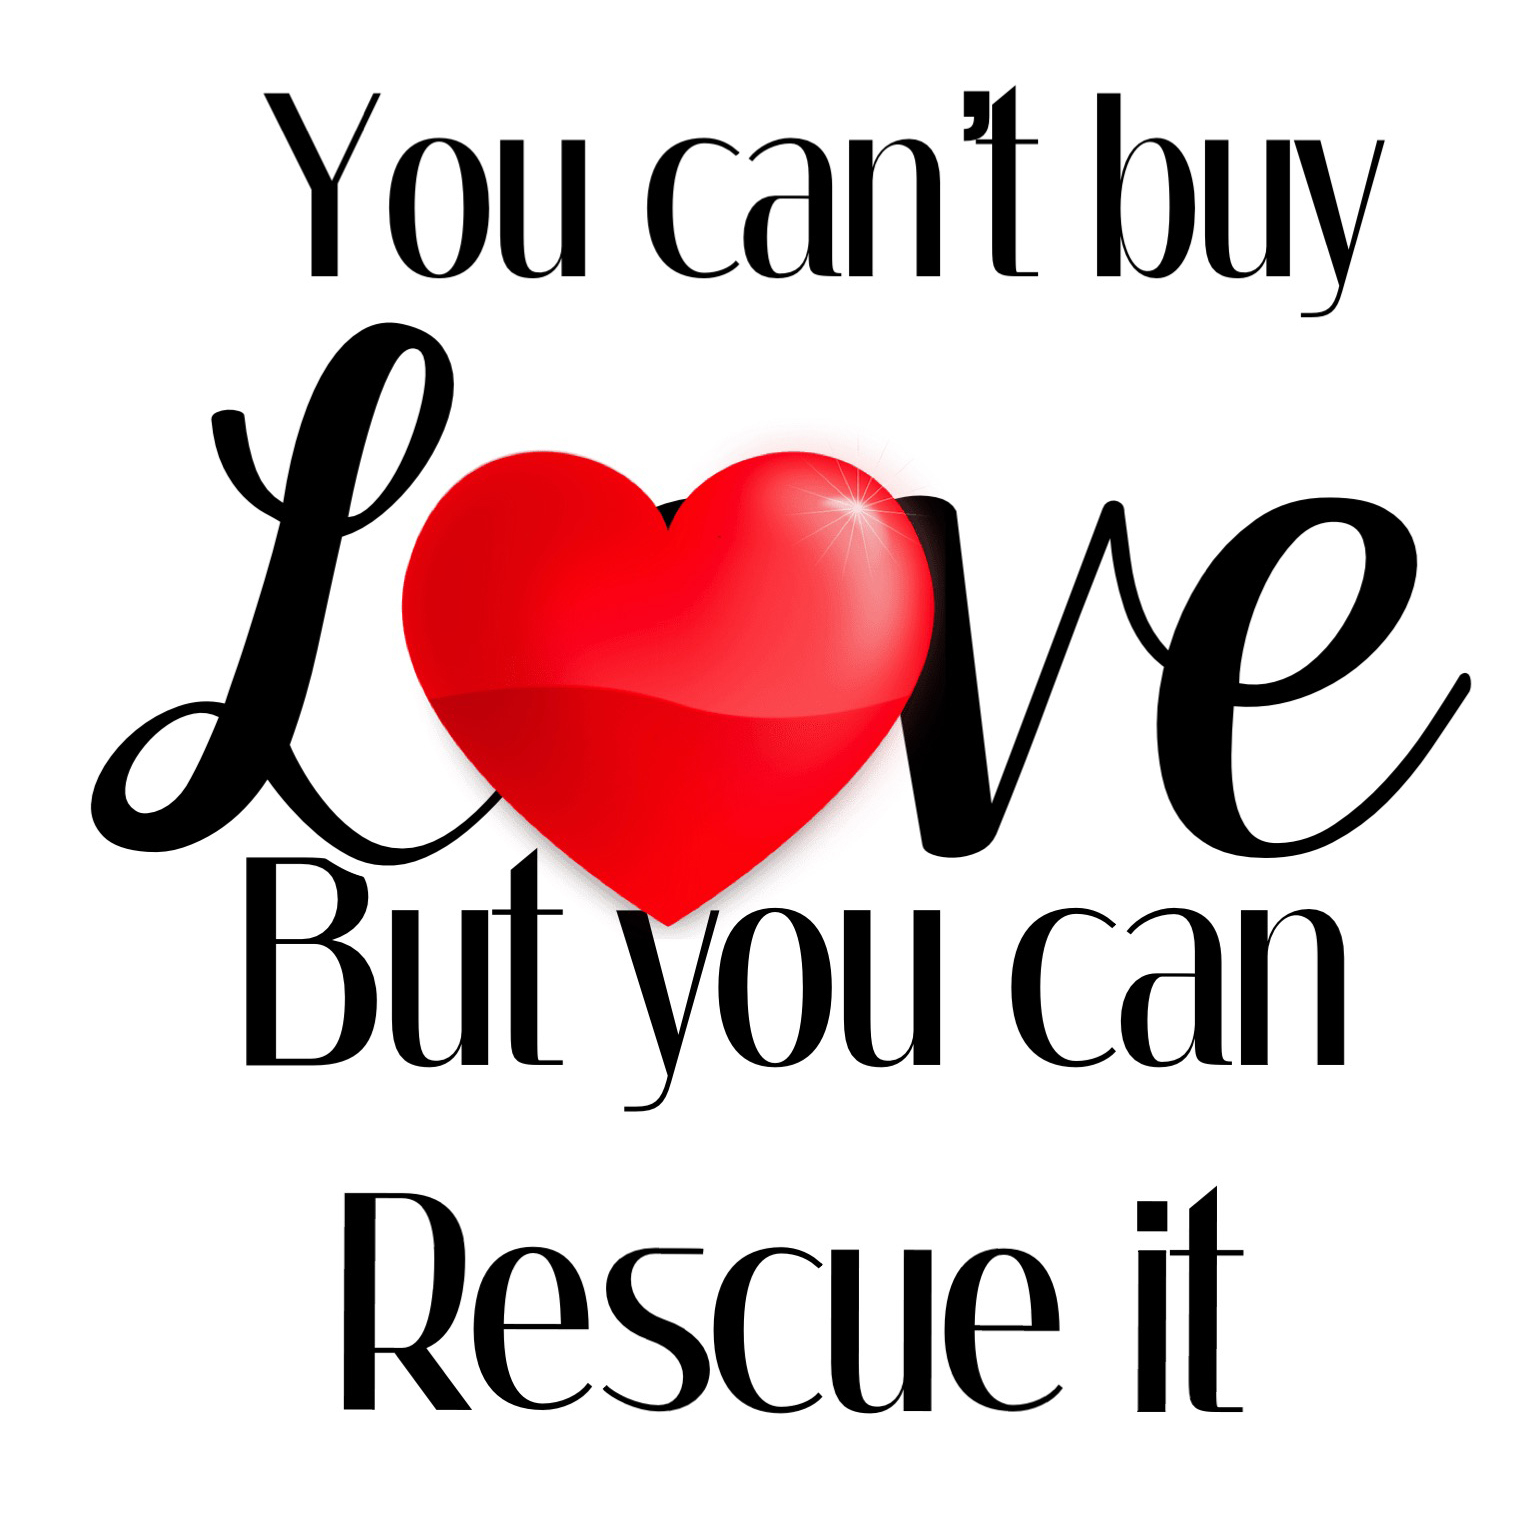 You can't buy love, but you can rescue it